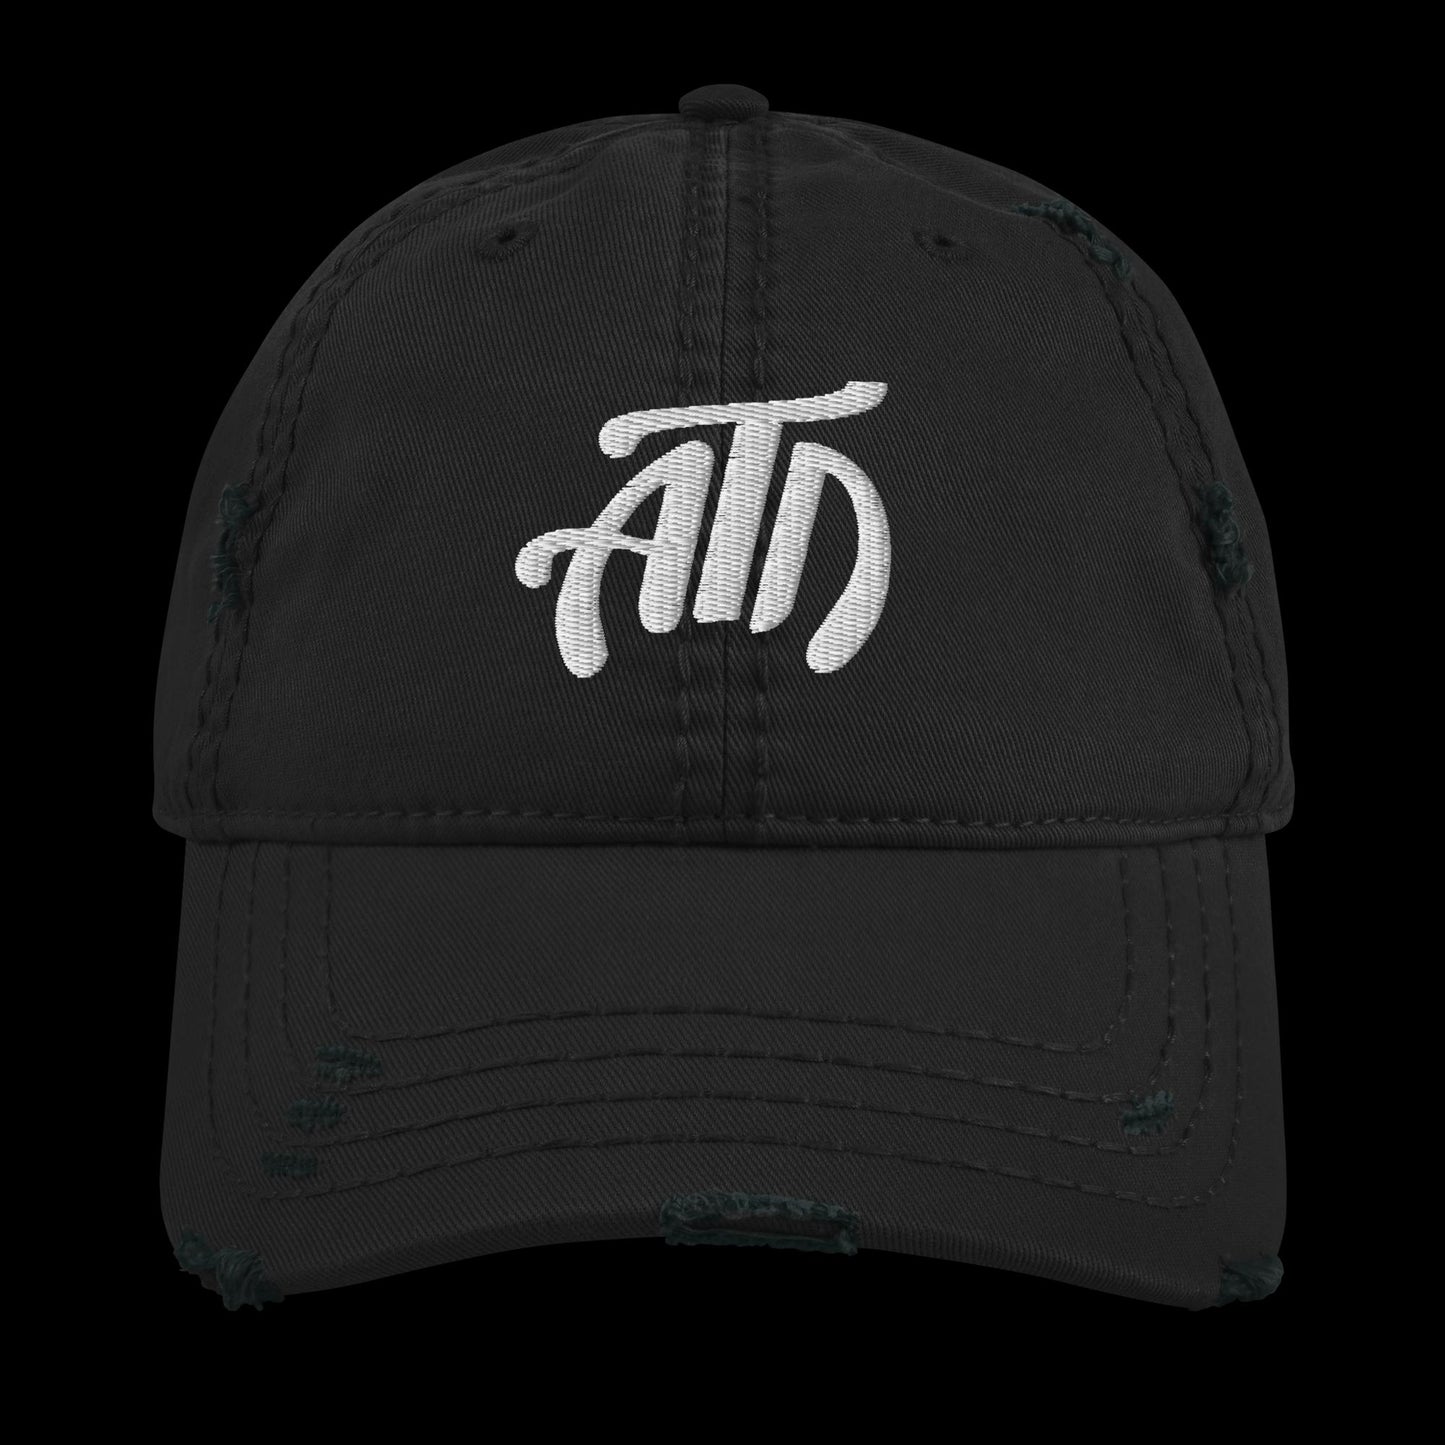 ATD Distressed Dad Hat